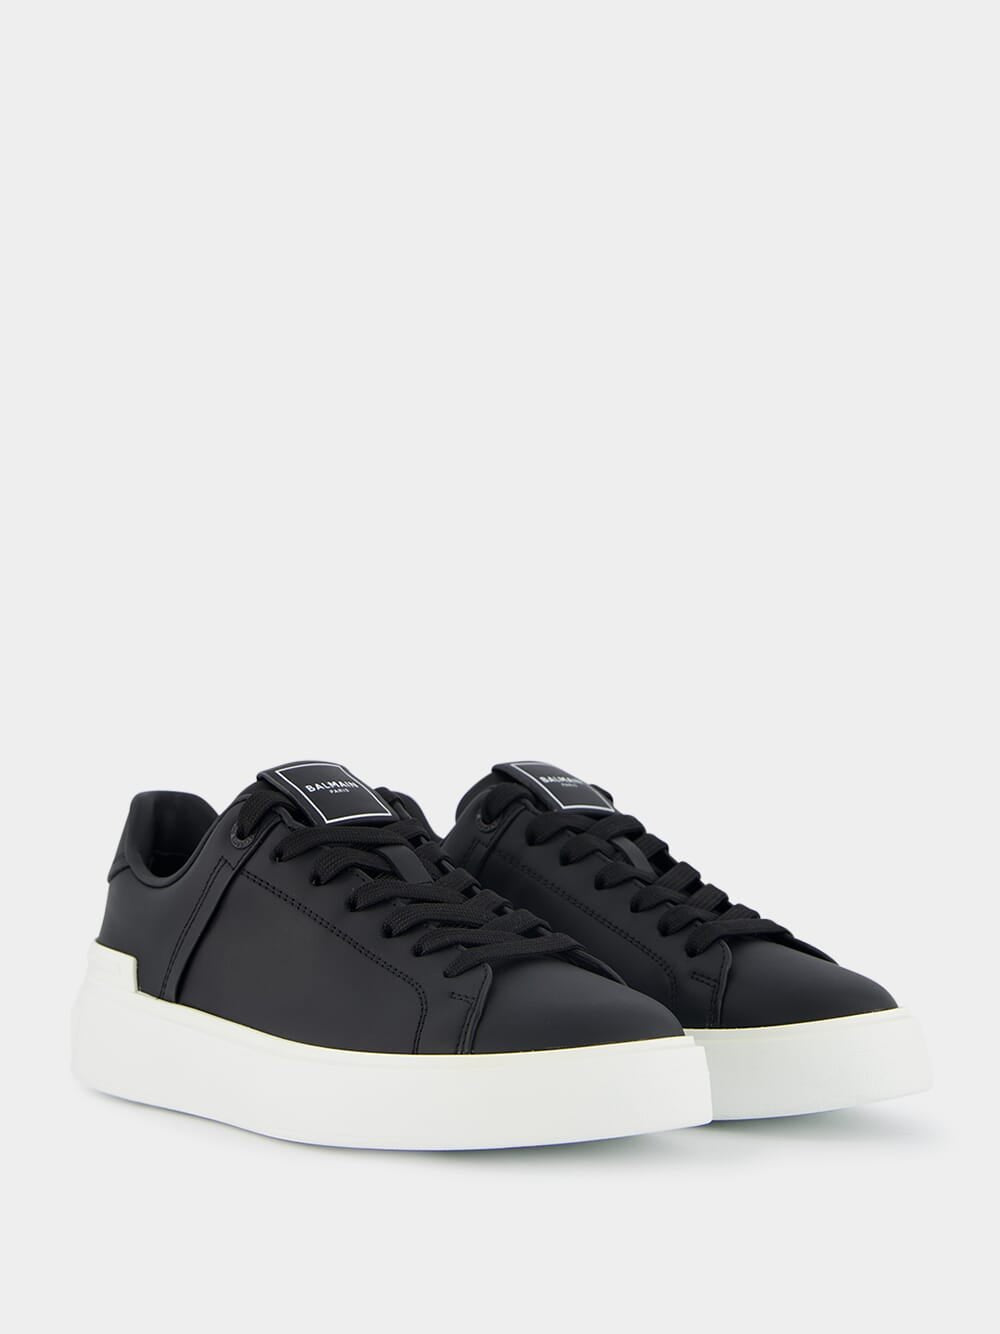 BalmainB-Court Low-Top Sneakers at Fashion Clinic